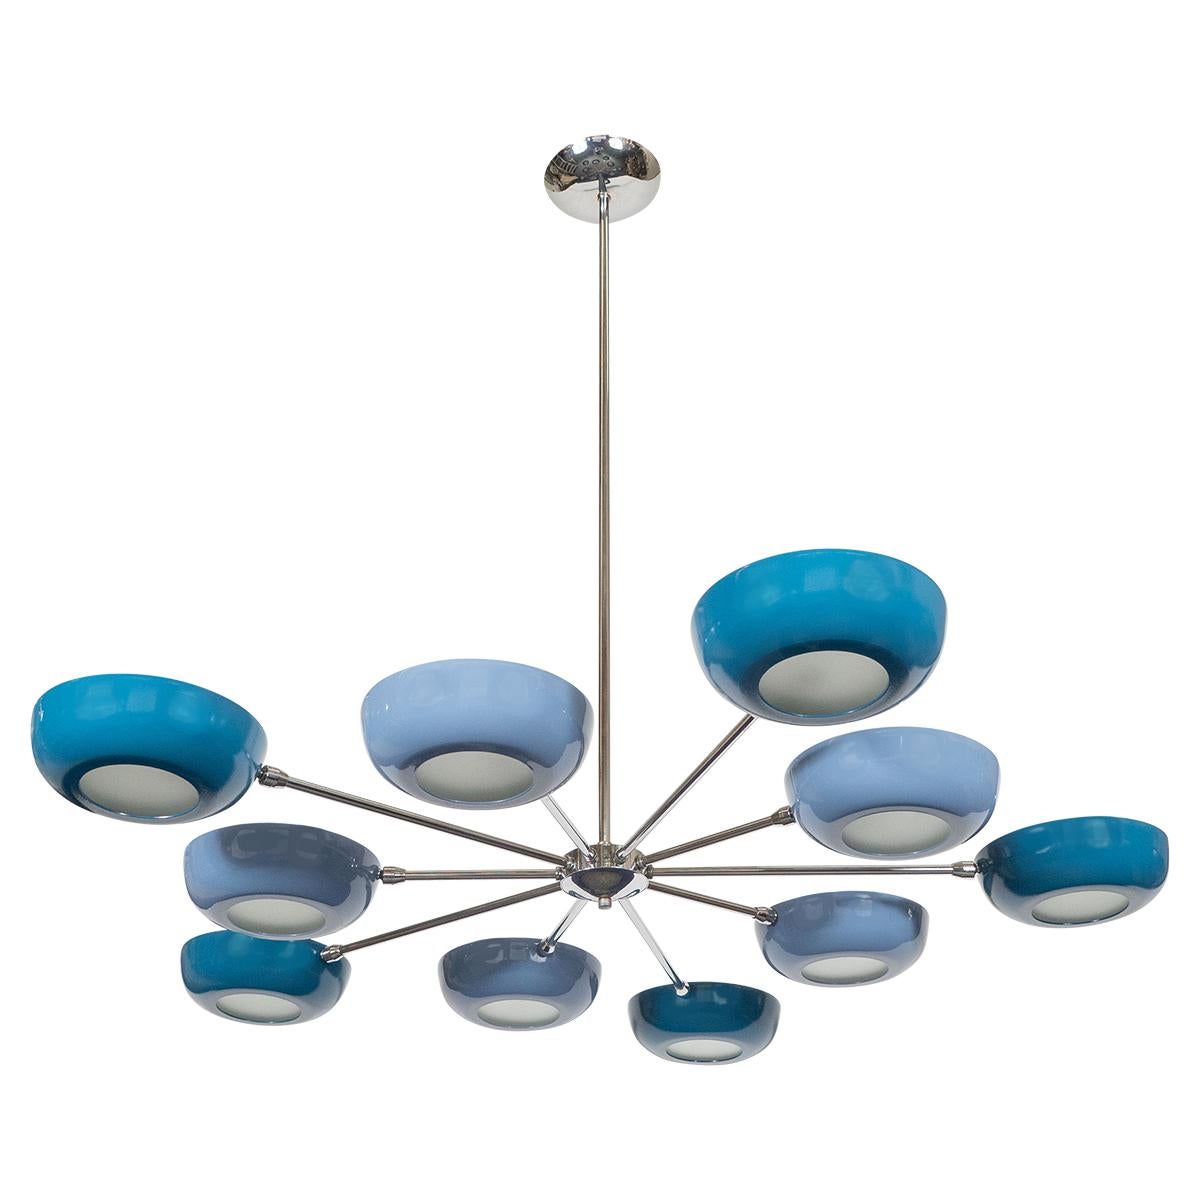 Ten-arm polished nickel starburst style chandelier with enameled metal and frosted glass shades.